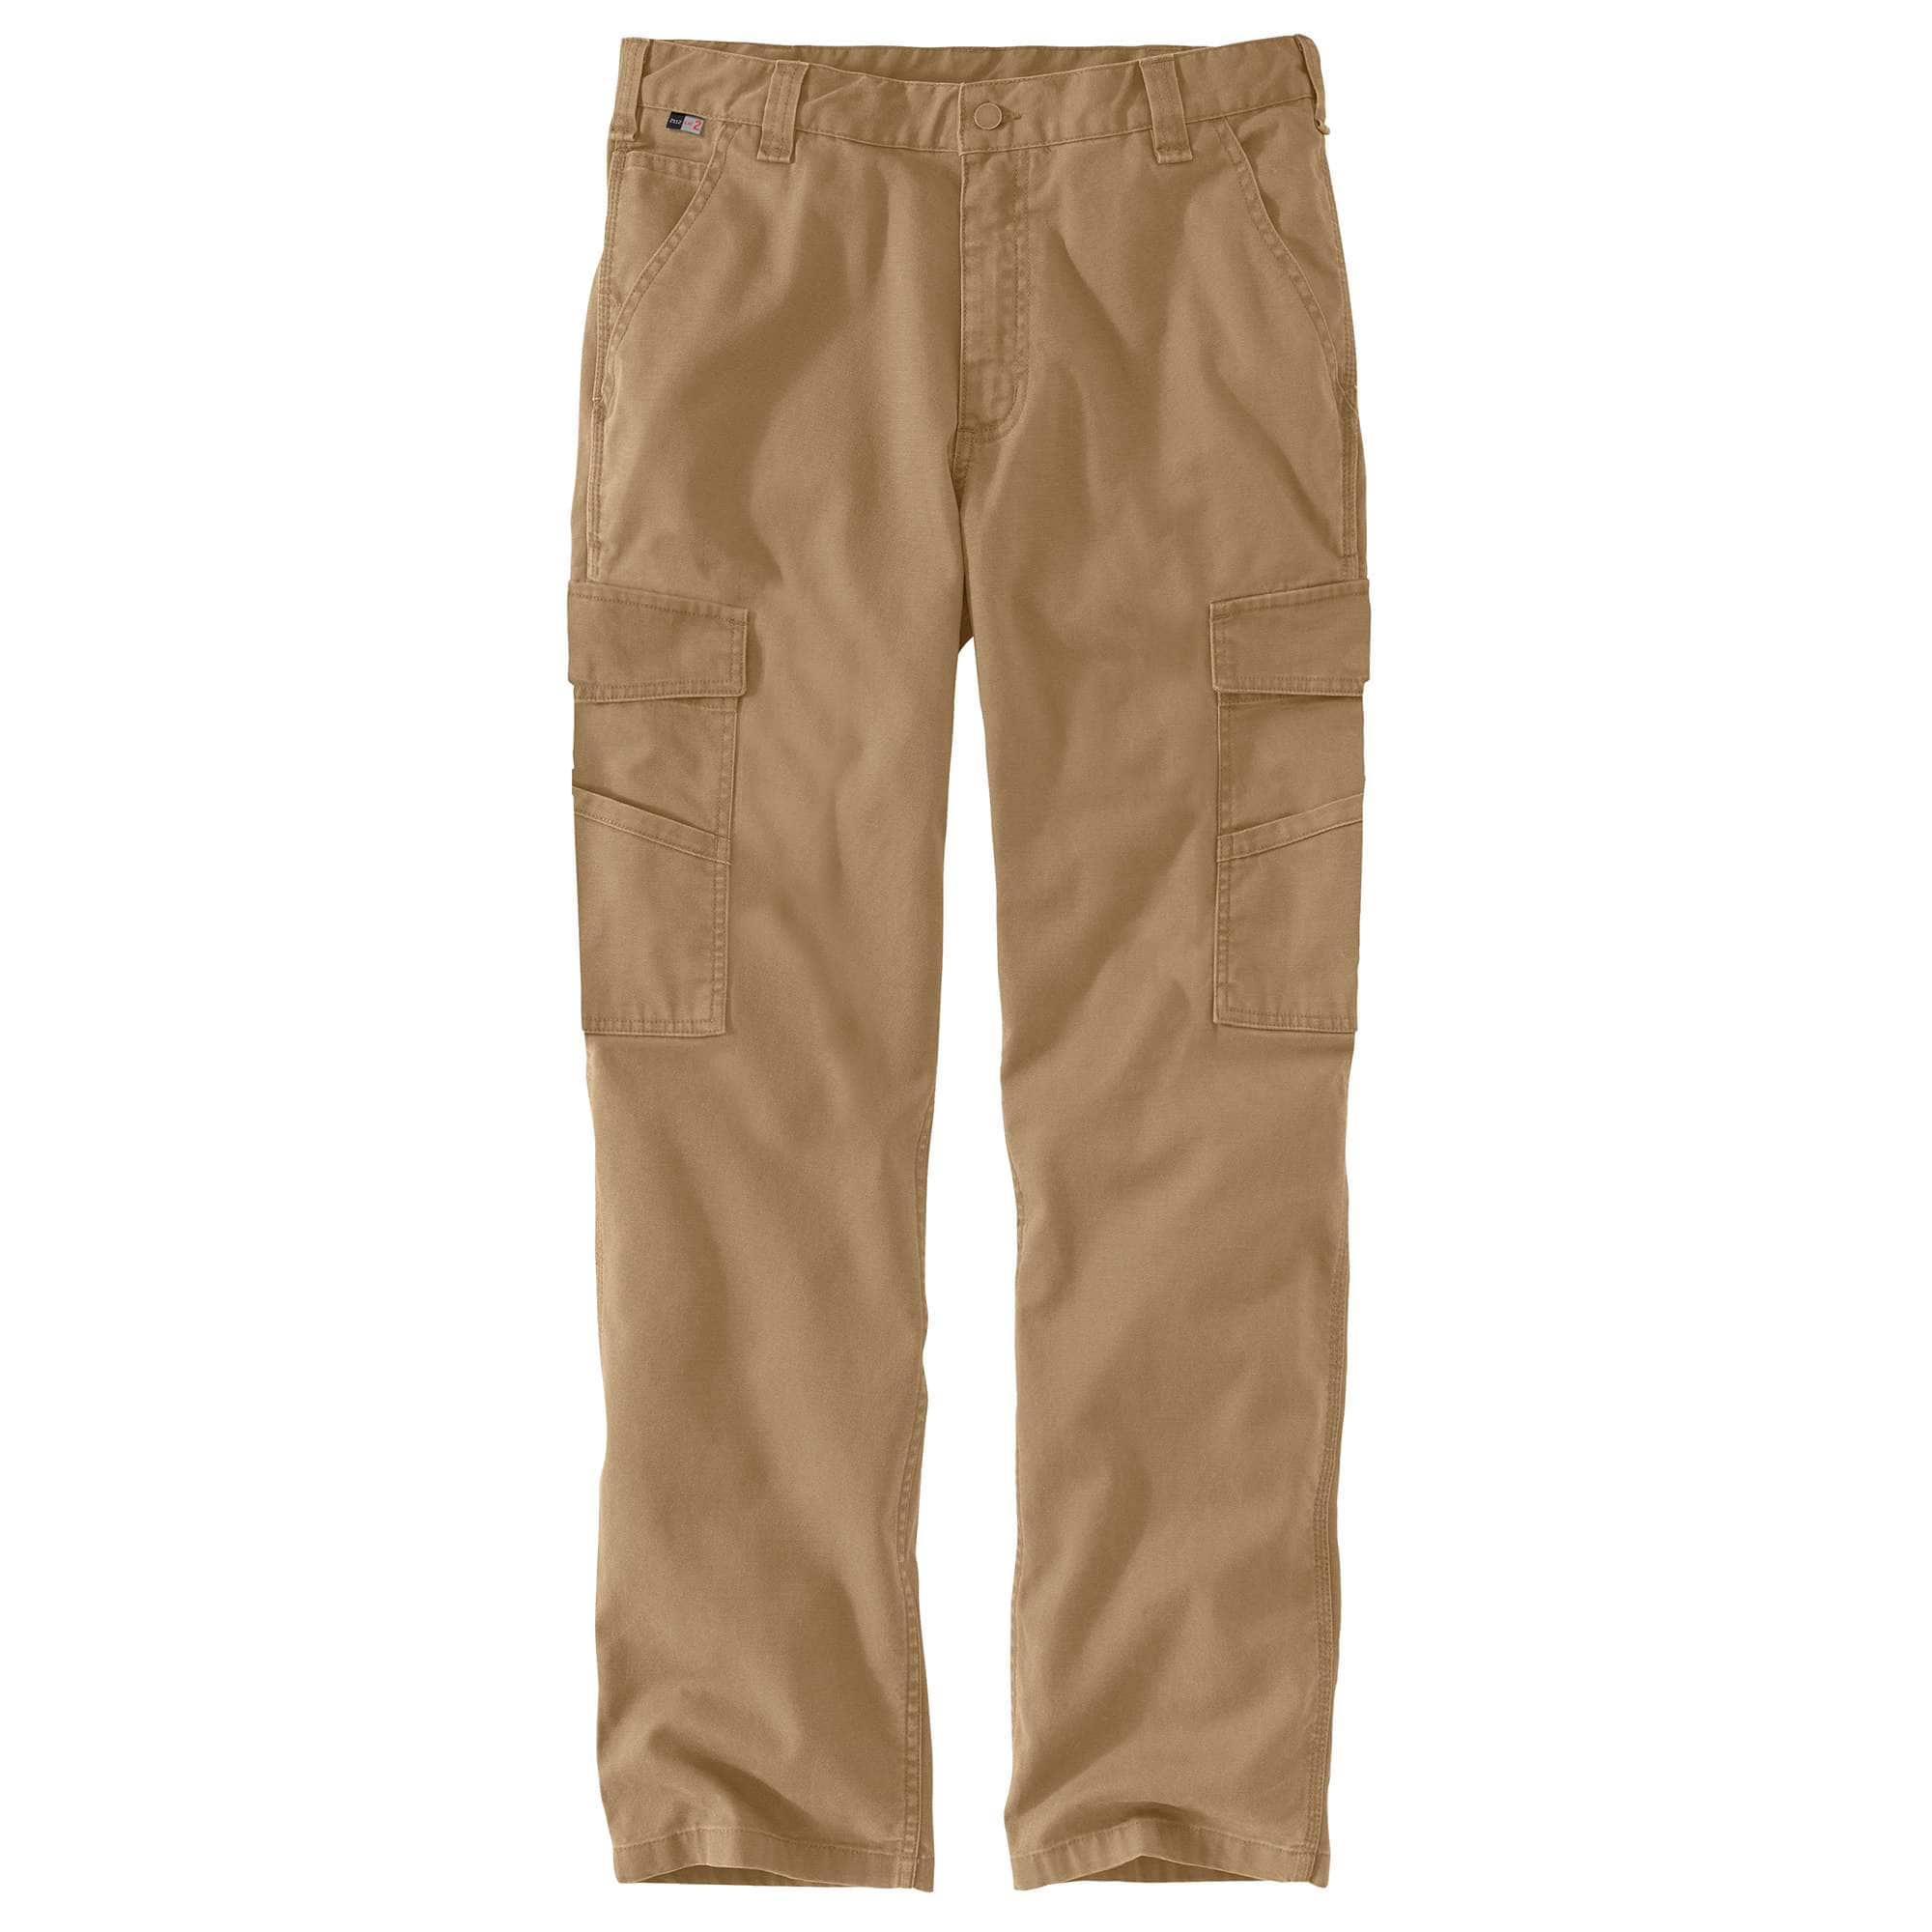 Carhartt FR Rugged Flex Relaxed Fit Canvas Work Pant - Navy